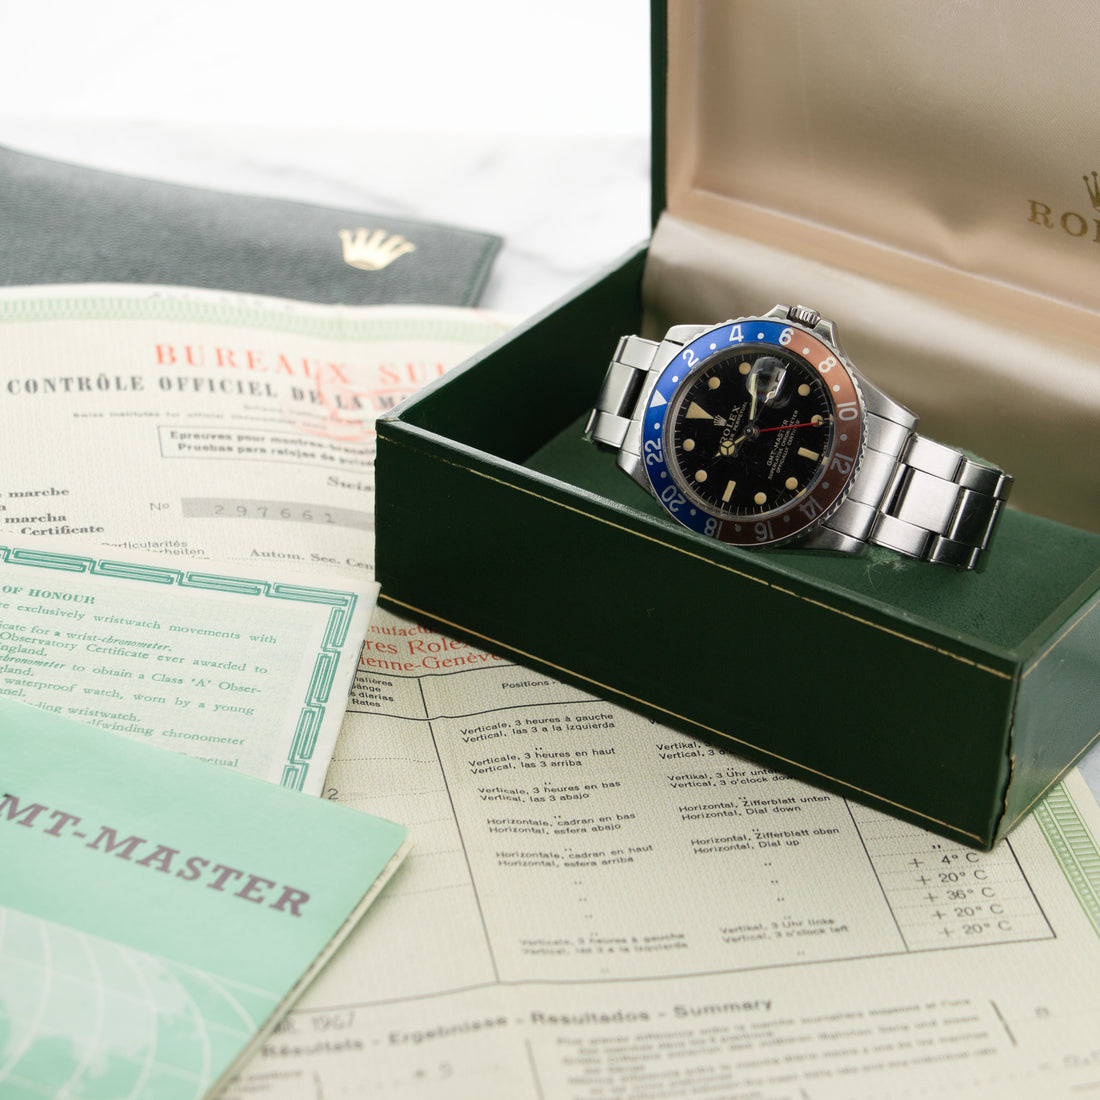 Rolex GMT-Master Gilt Watch Ref. 1675 with Original Box and Papers